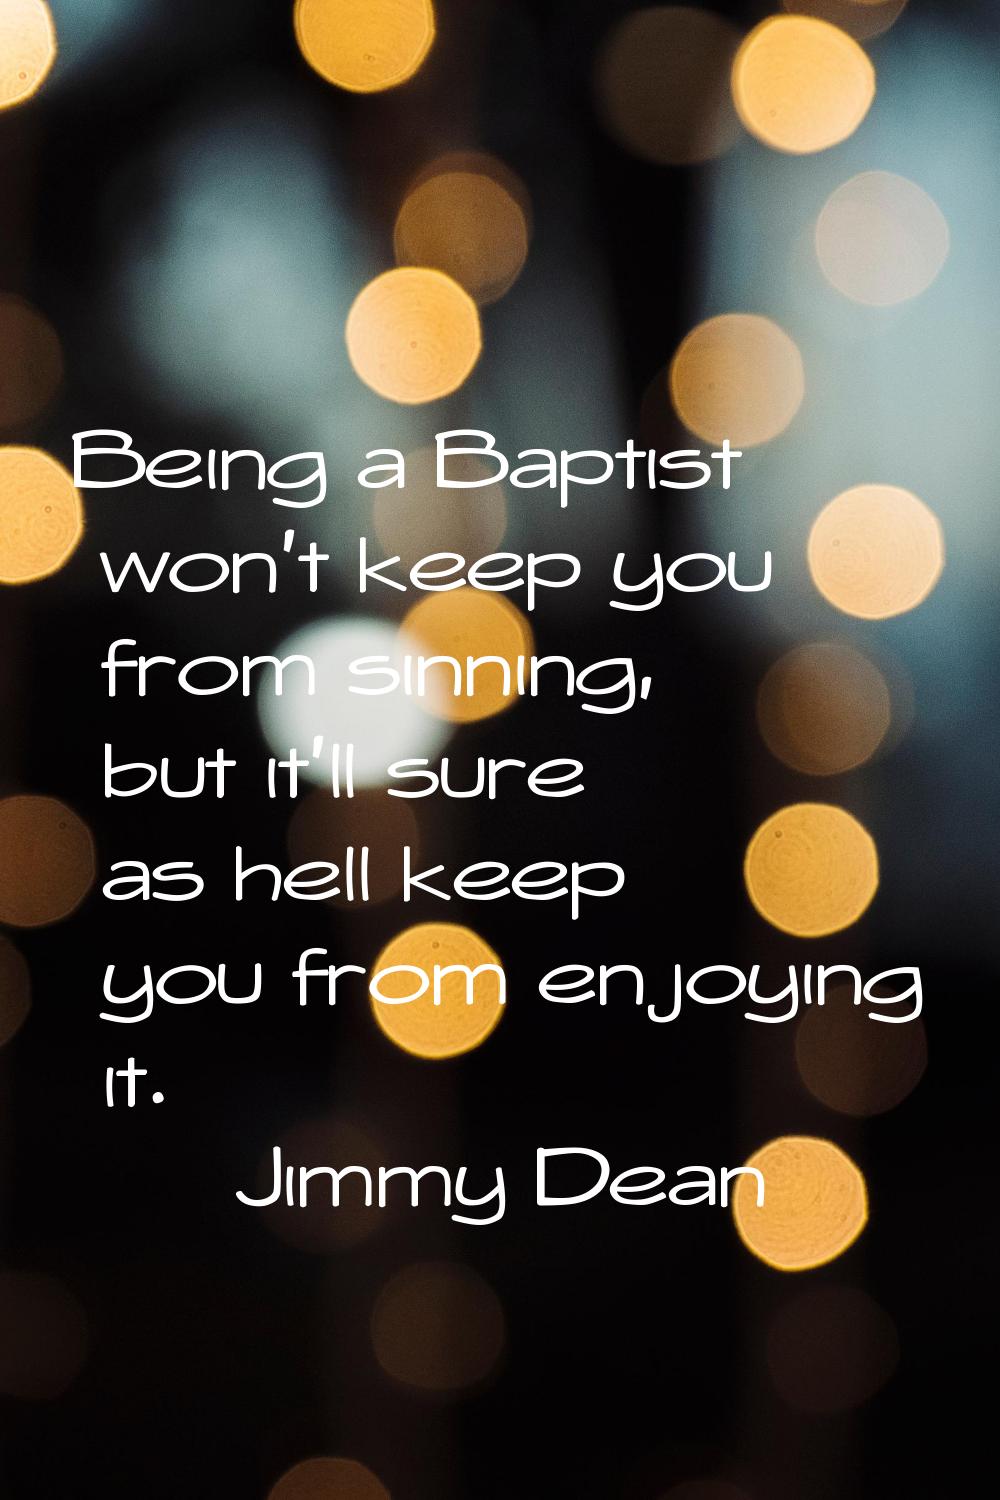 Being a Baptist won't keep you from sinning, but it'll sure as hell keep you from enjoying it.